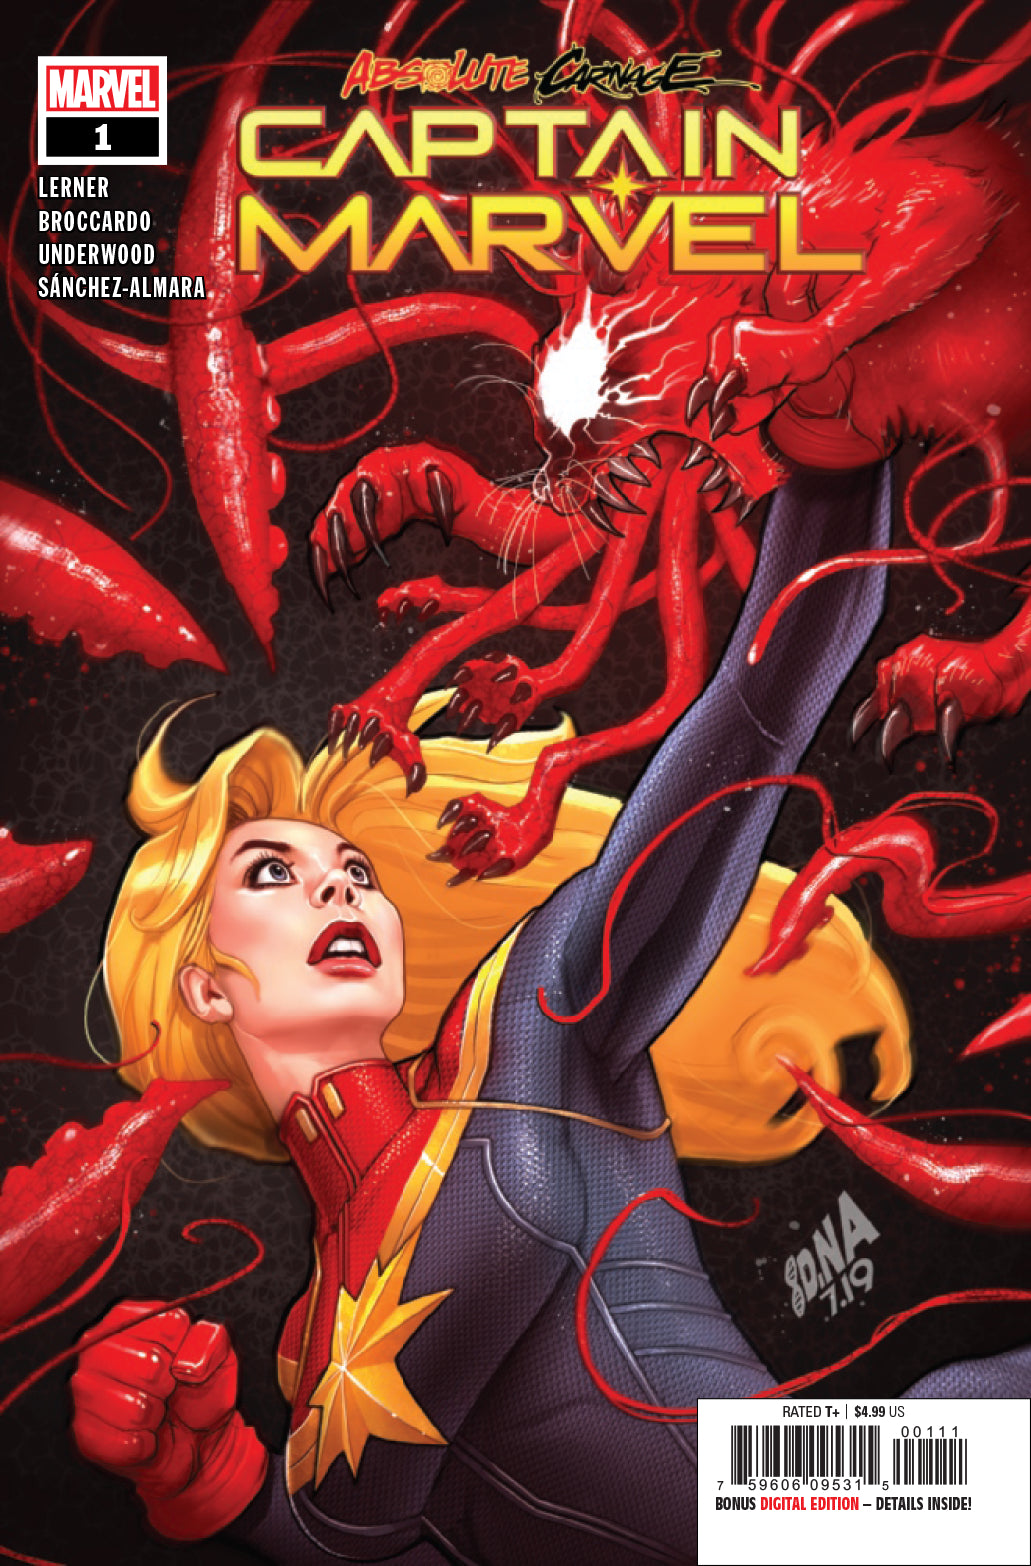 ABSOLUTE CARNAGE CAPTAIN MARVEL #1 AC | Game Master's Emporium (The New GME)